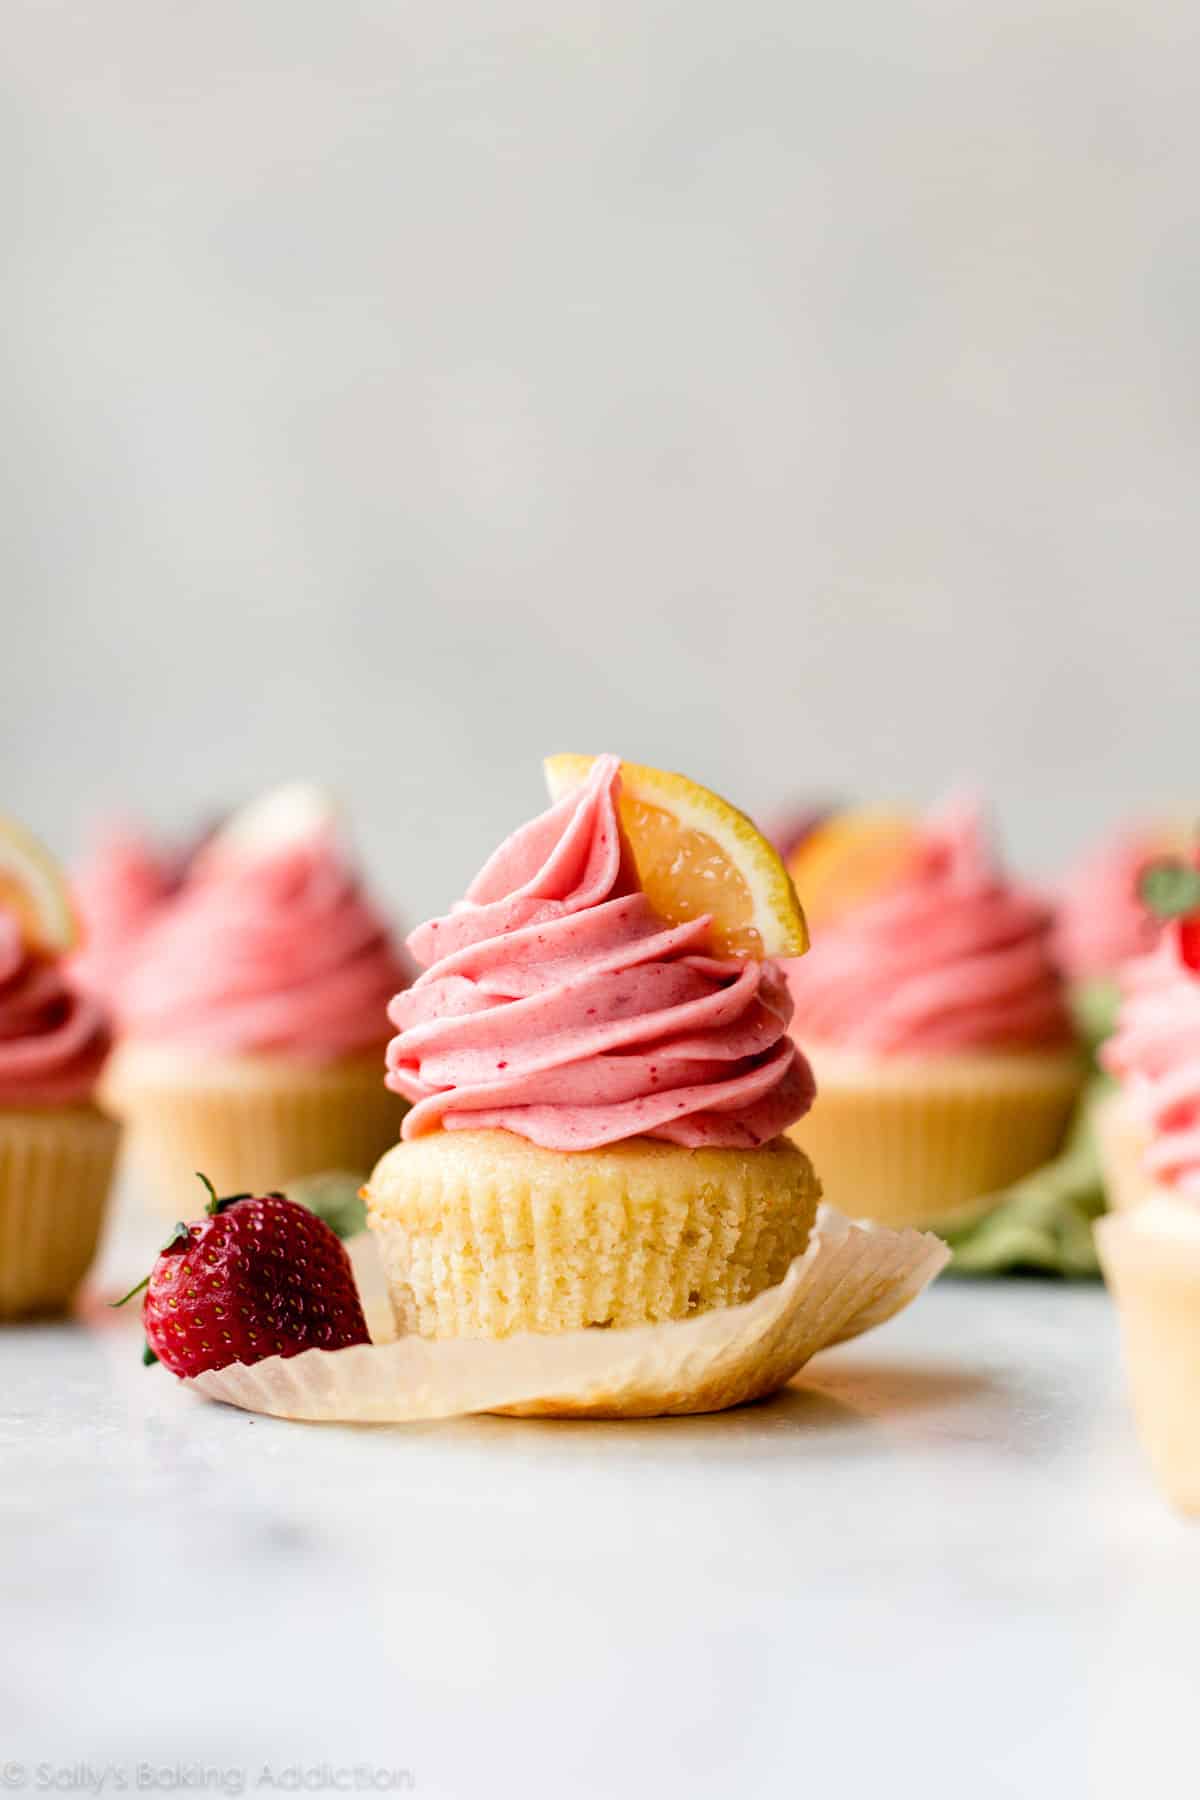 unwrapped lemon cupcake with pink strawberry frosting on top